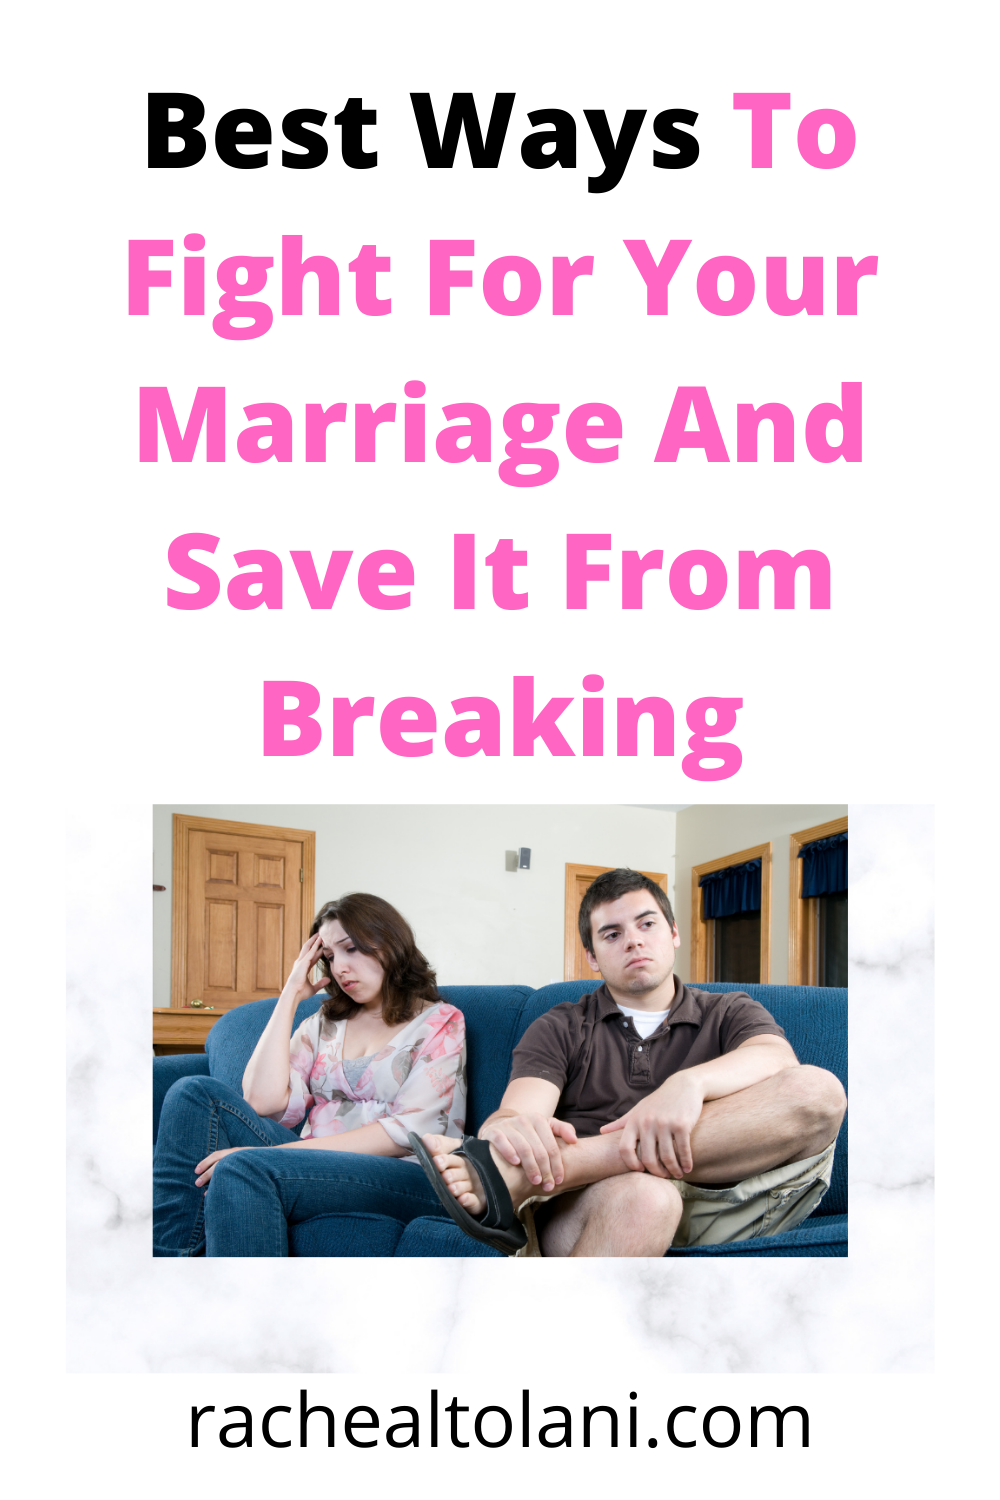 Got Stuck? Try These Tips To Streamline Your Save The Marriage System